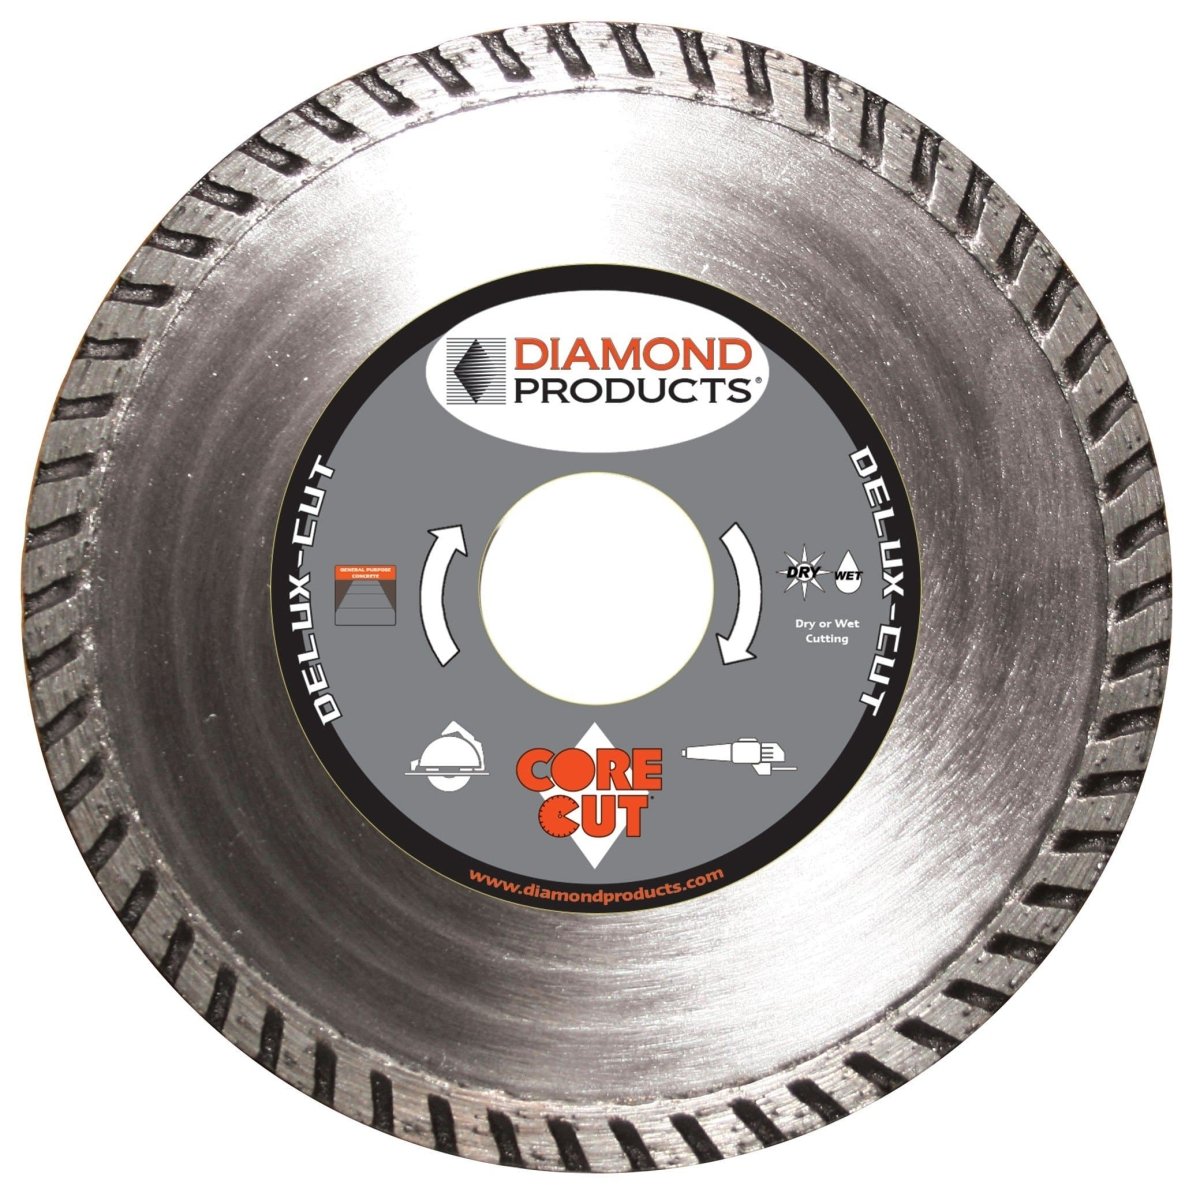 Delux-Cut High Speed Turbo Blades - Diamond Products